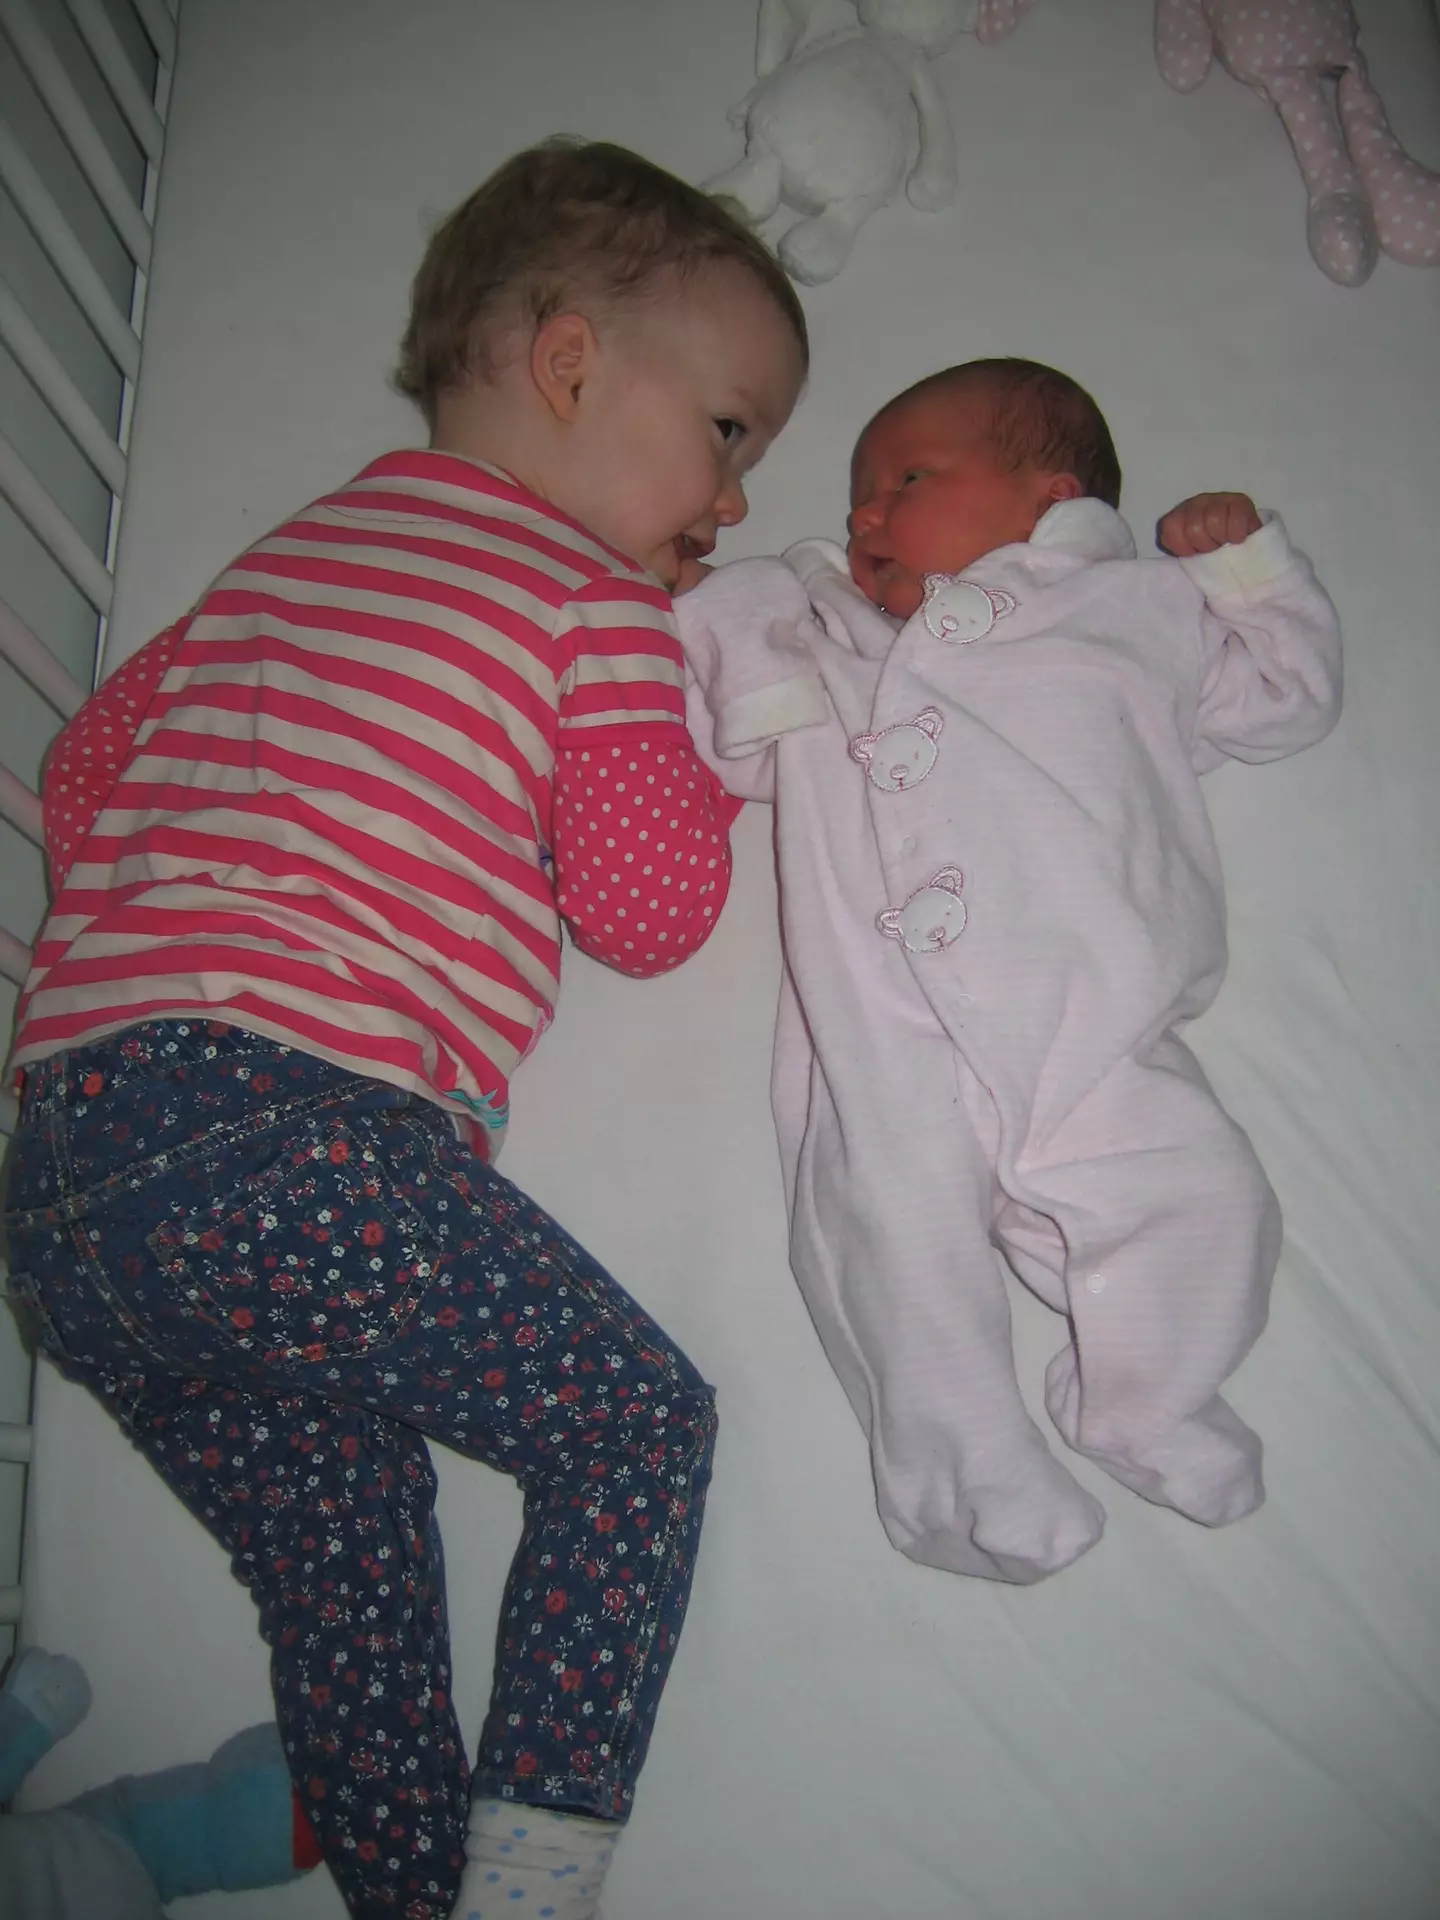 Sarah had a subsequent pregnancy with her rainbow baby, Iris, who was safely delivered full-term in 2013 (Sarah Miles).